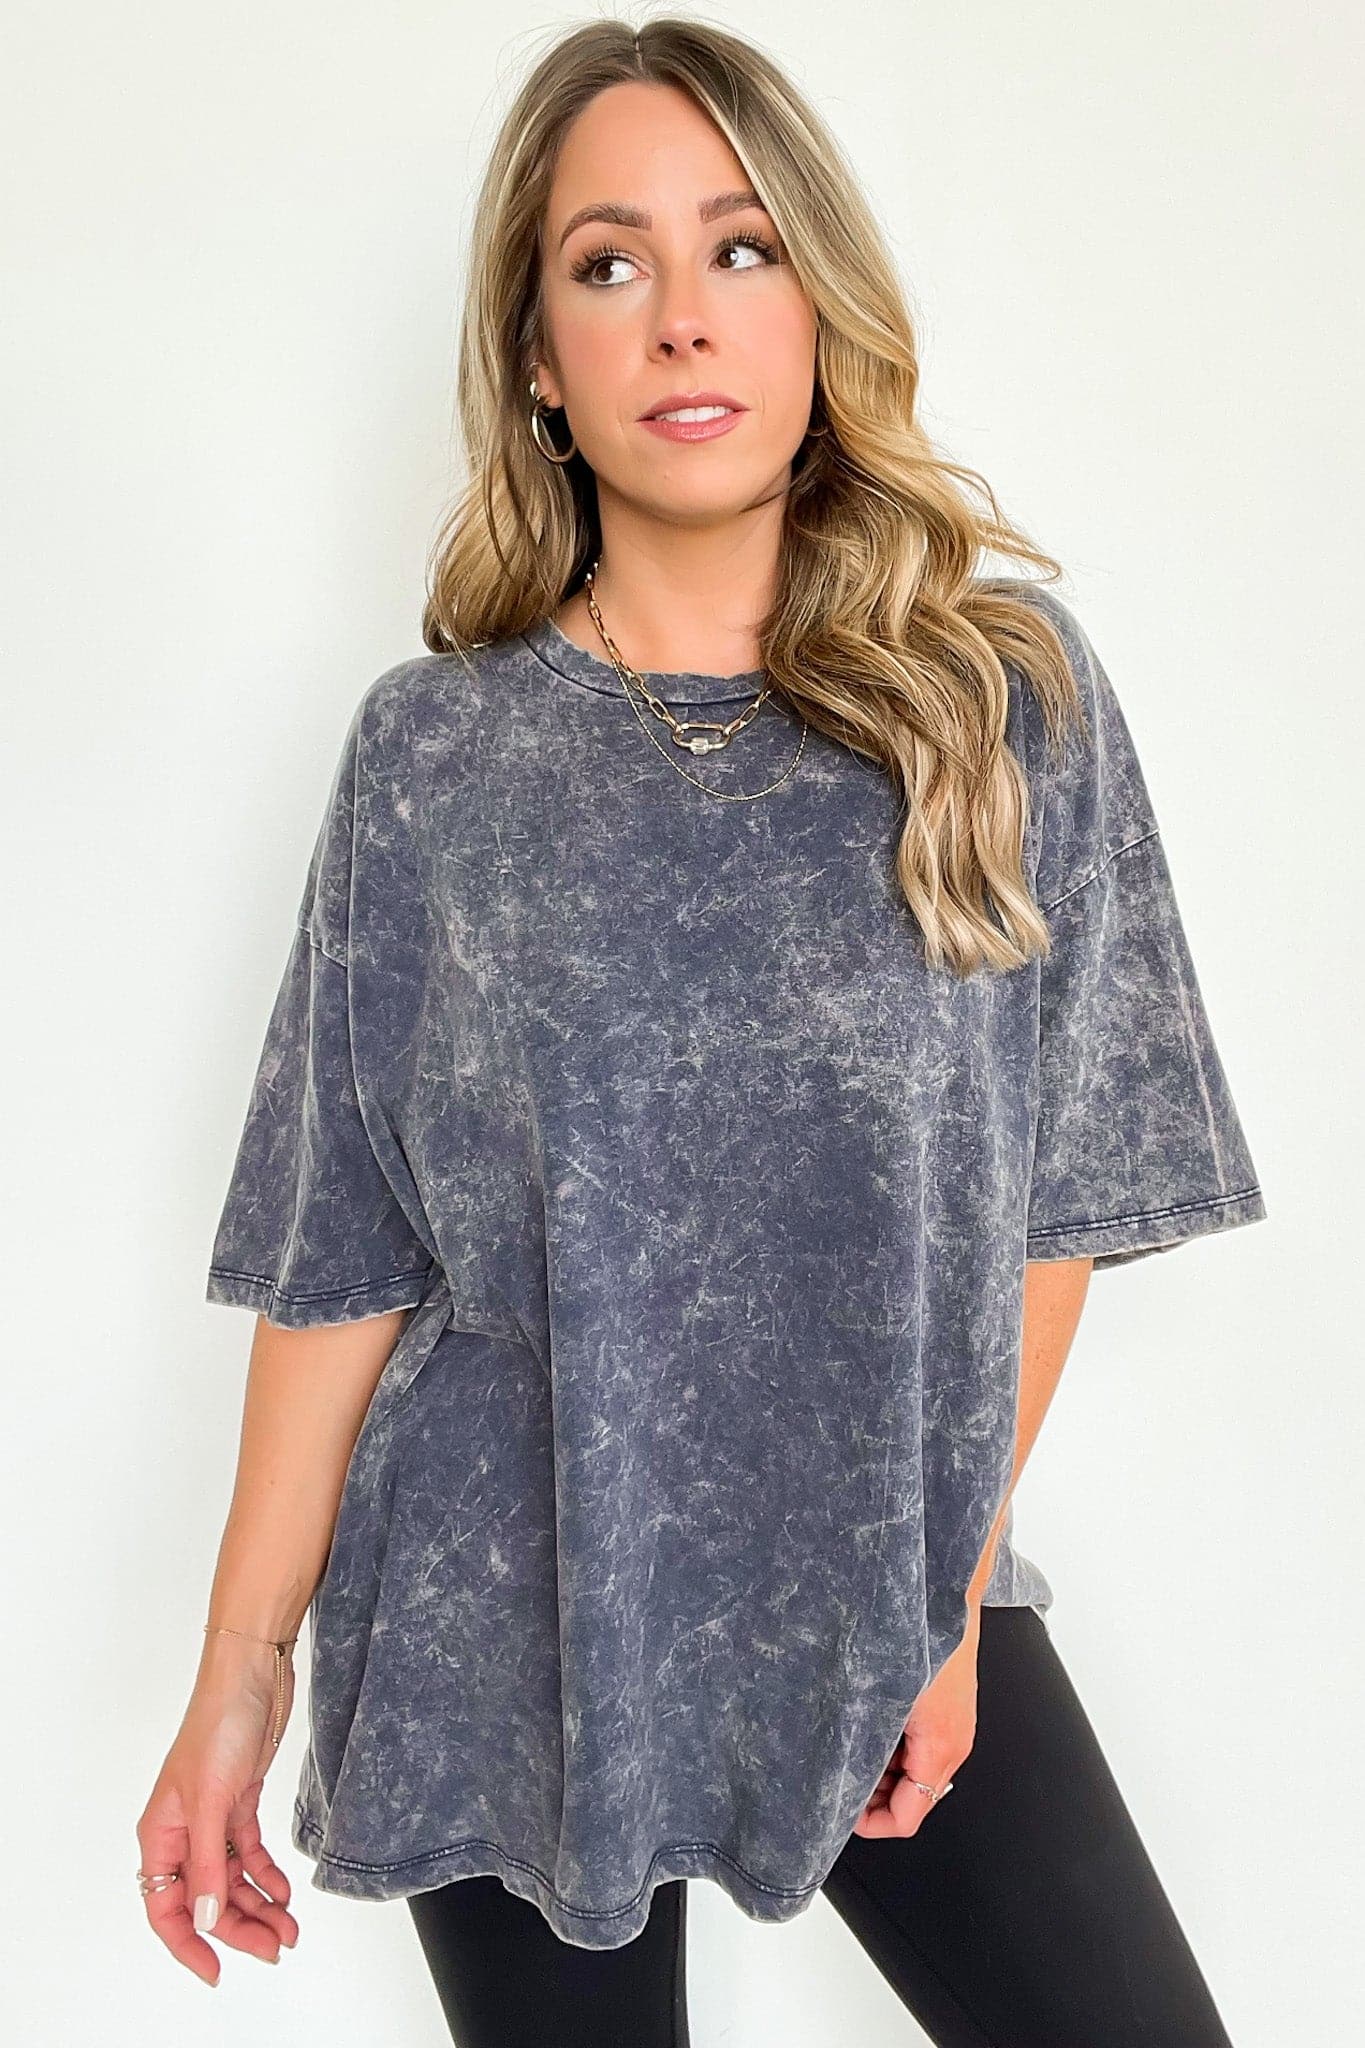 Blackberry / SM Weekend Awaits Mineral Wash Oversized Top - BACK IN STOCK - Madison and Mallory